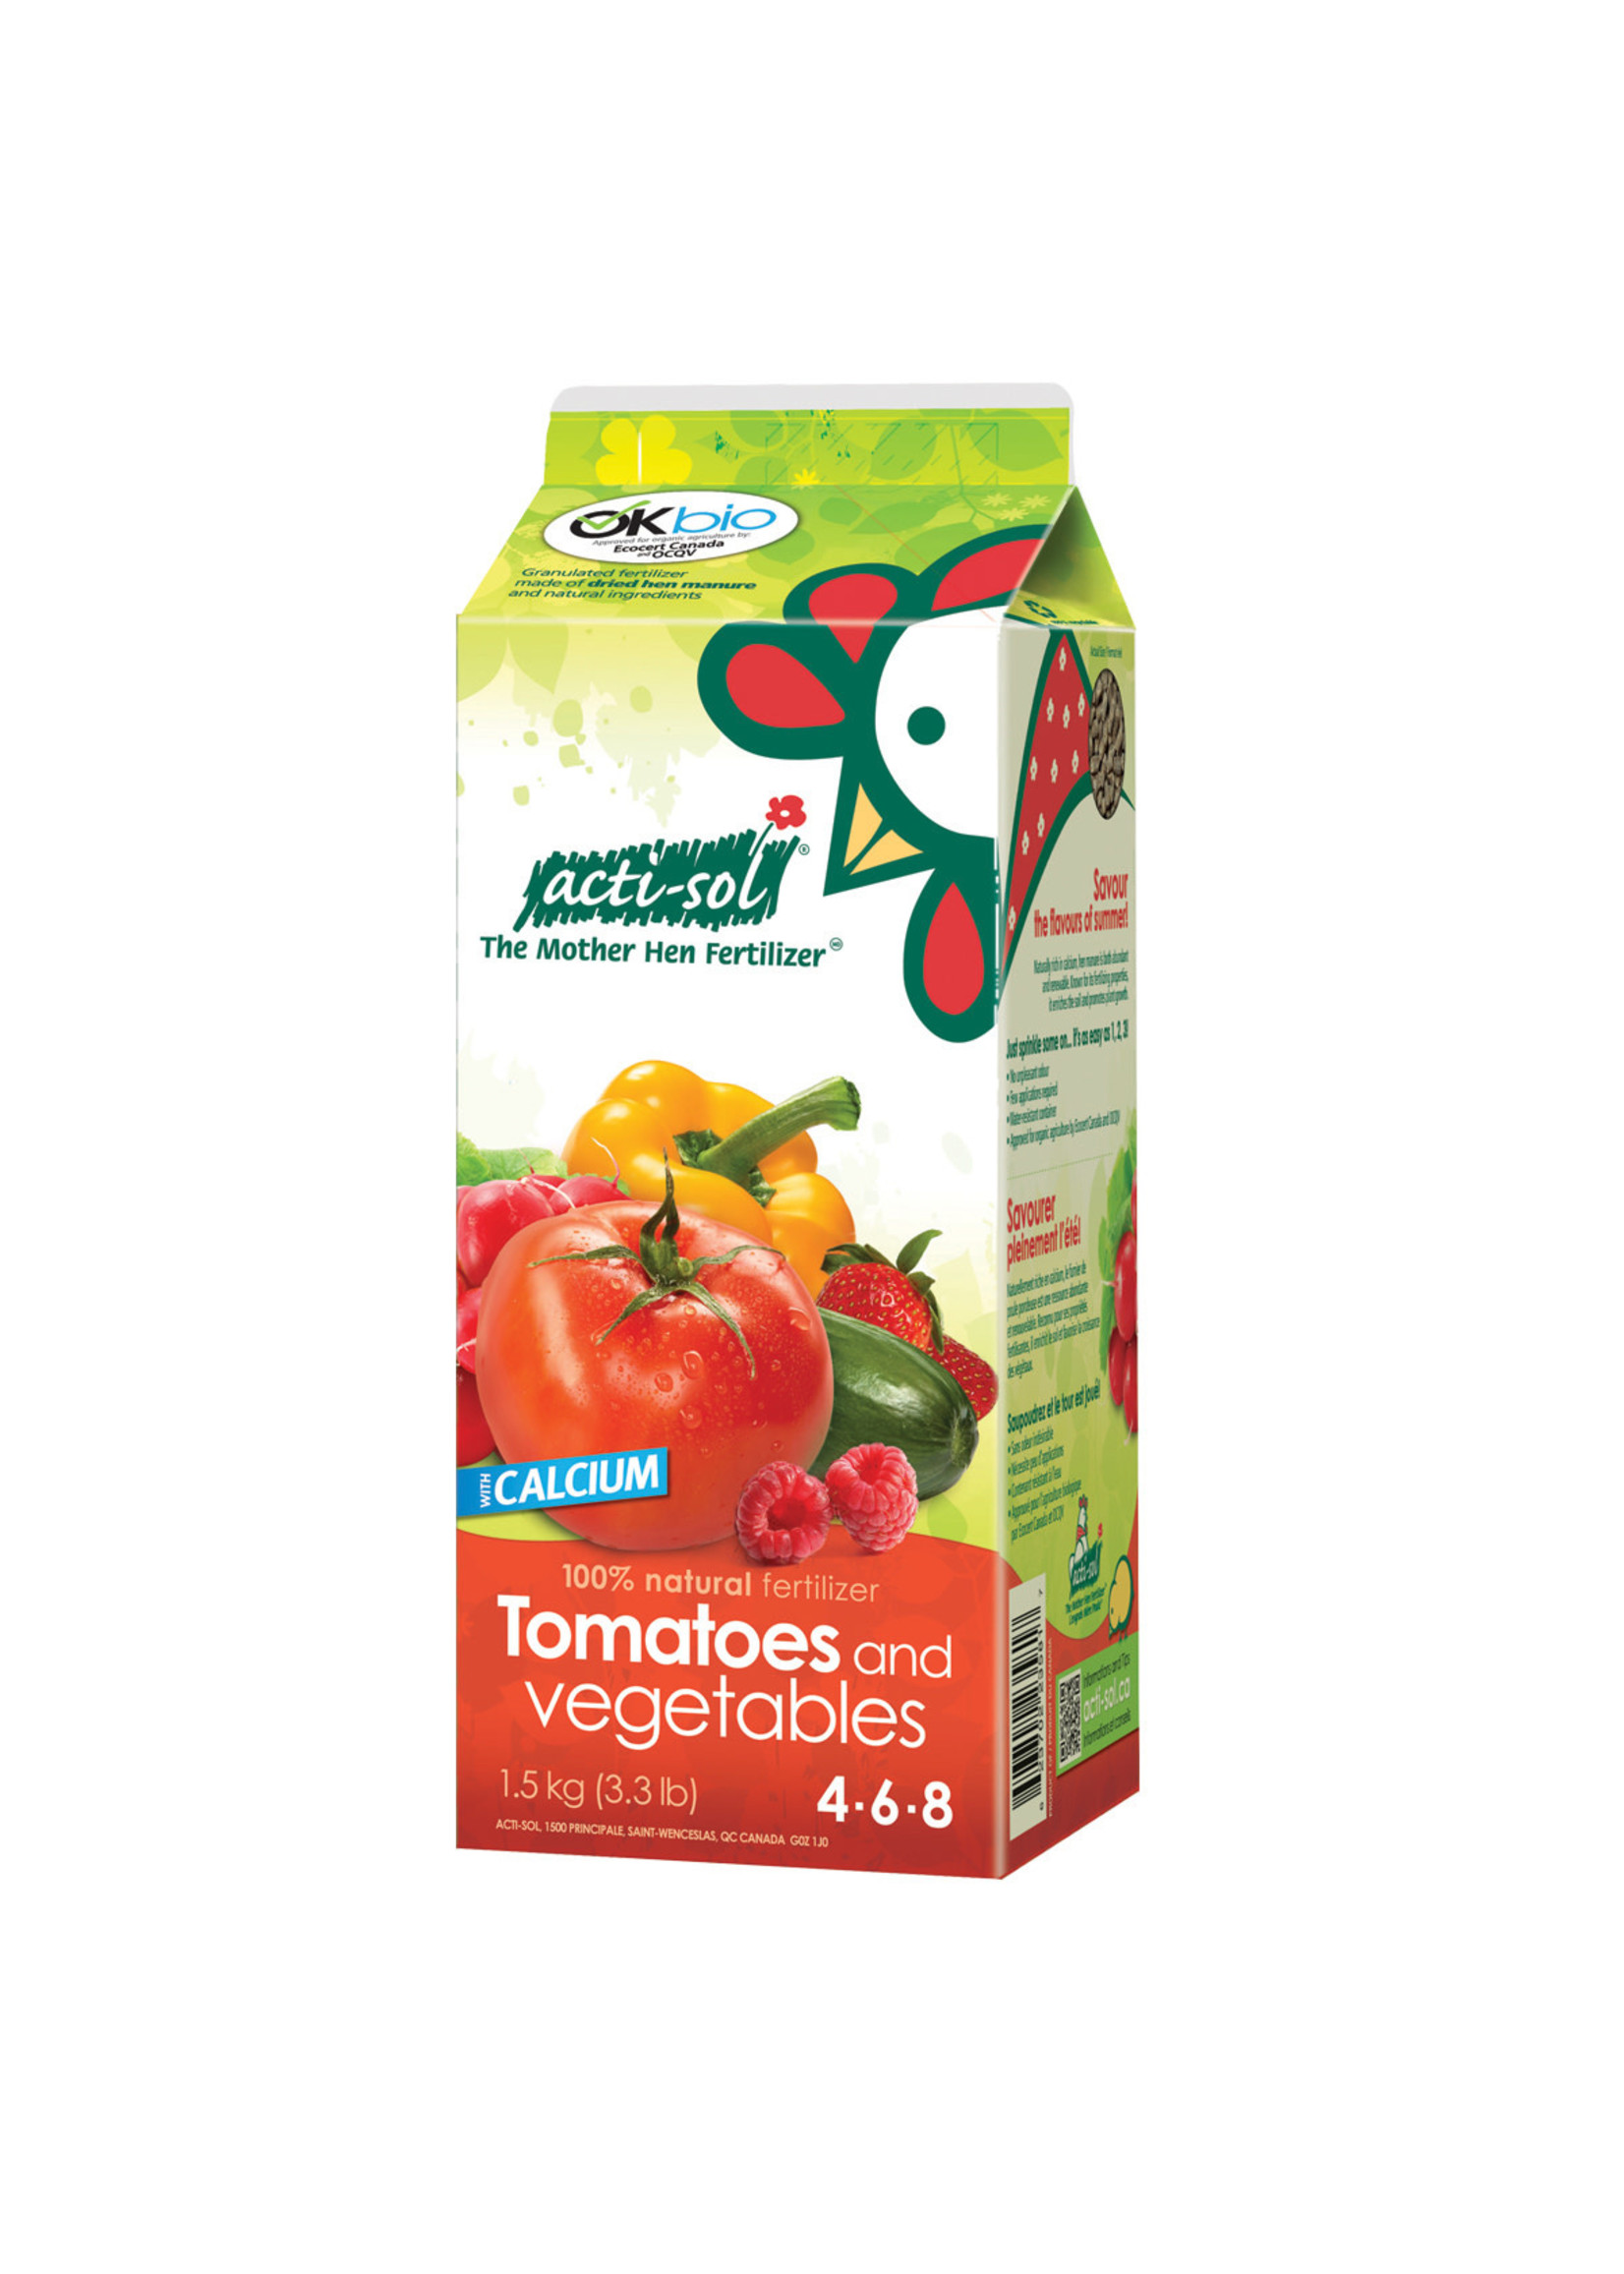 Acti-sol Acti-Sol Tomatoes and Vegetables 4-6-8 1.5Kg